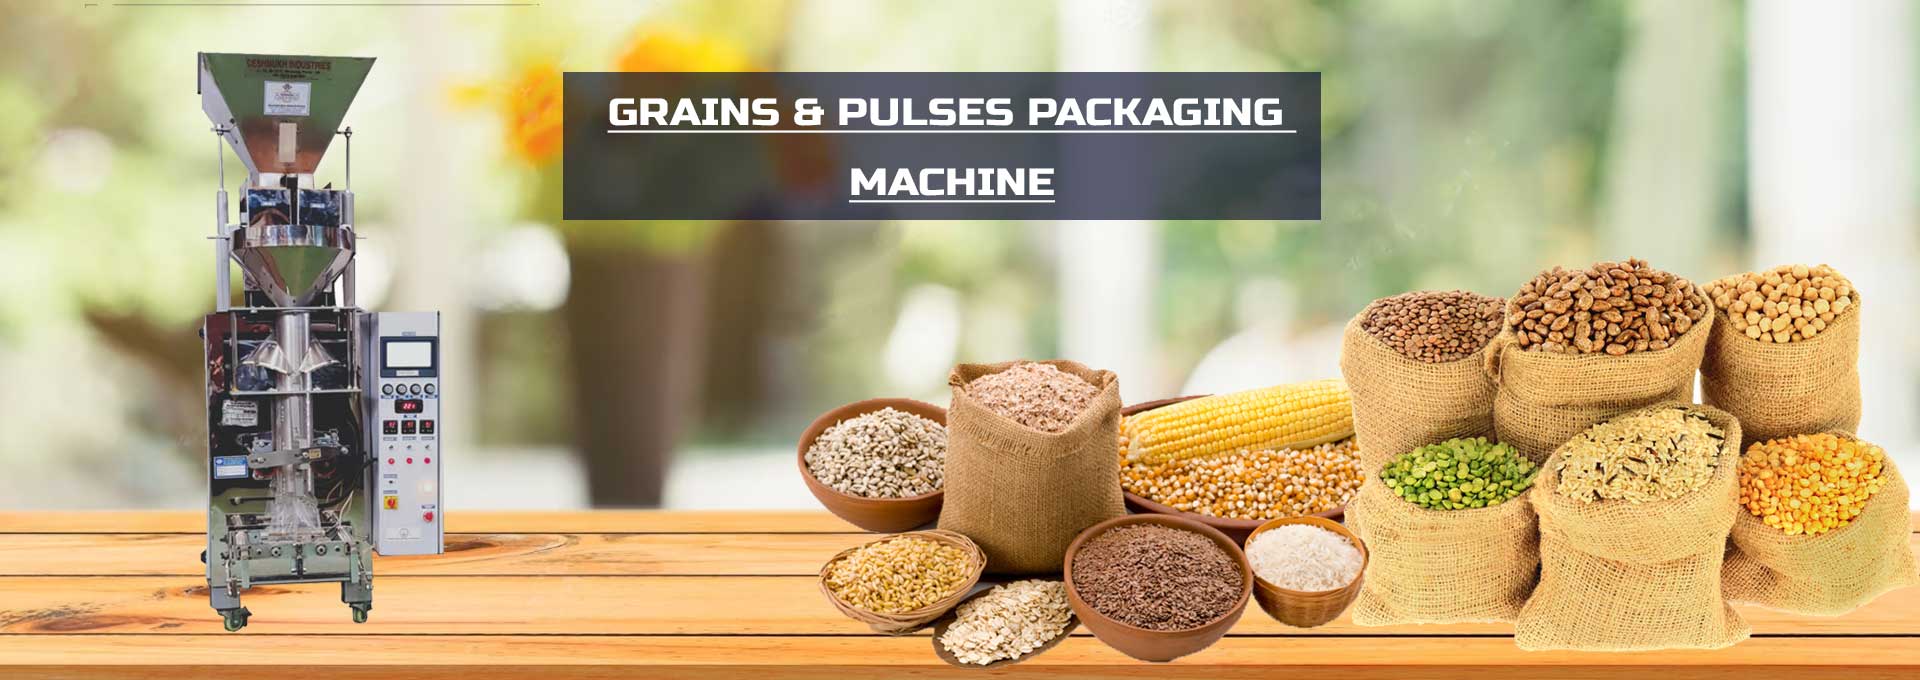 Double Head Grains & Pulses Packaging Machine Manufacturers